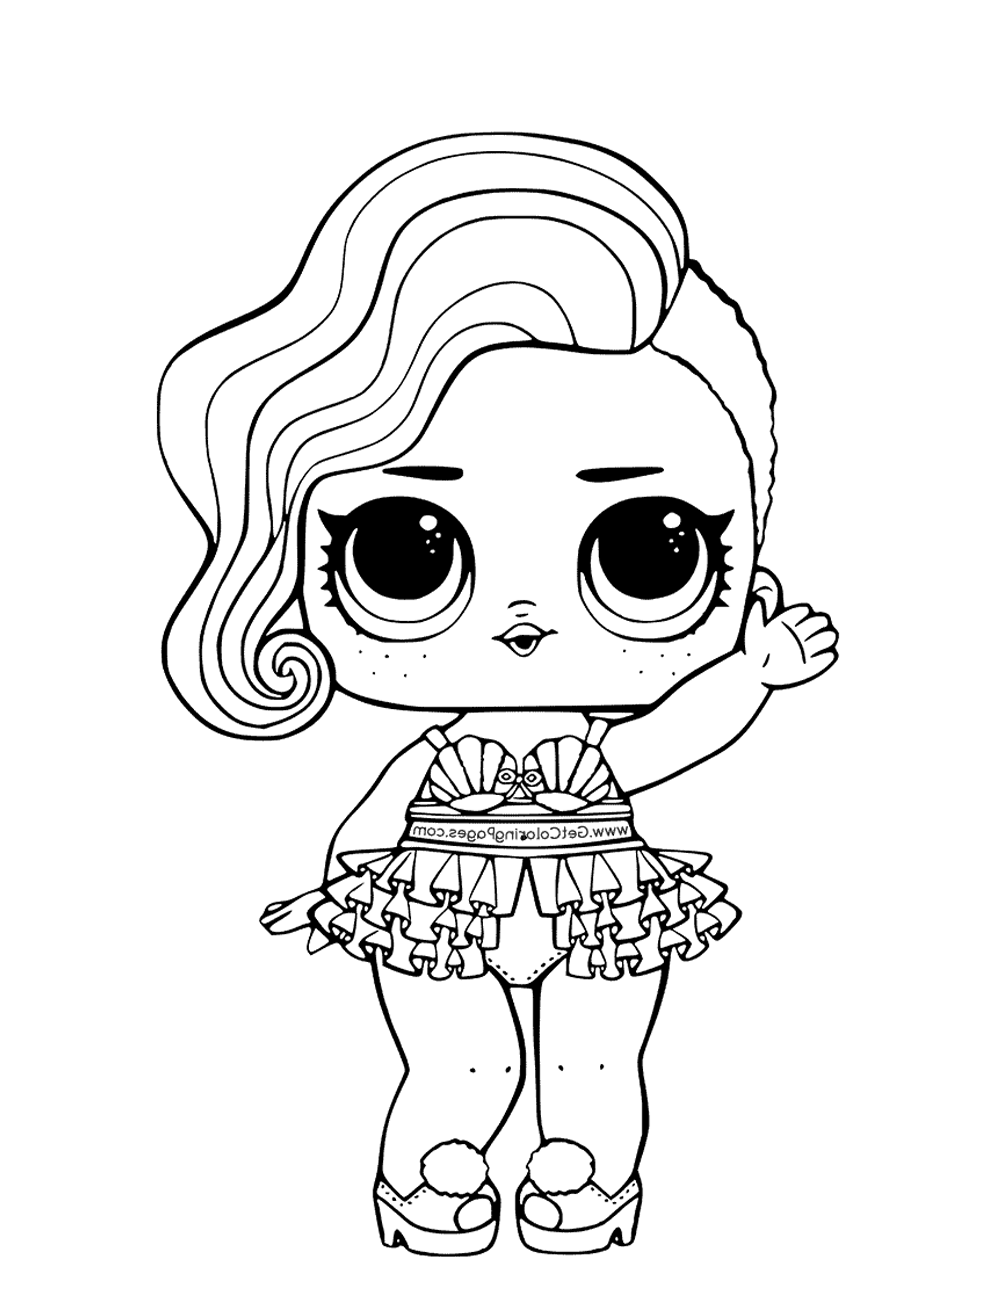 LOL Coloring Pages FREE Printable 119